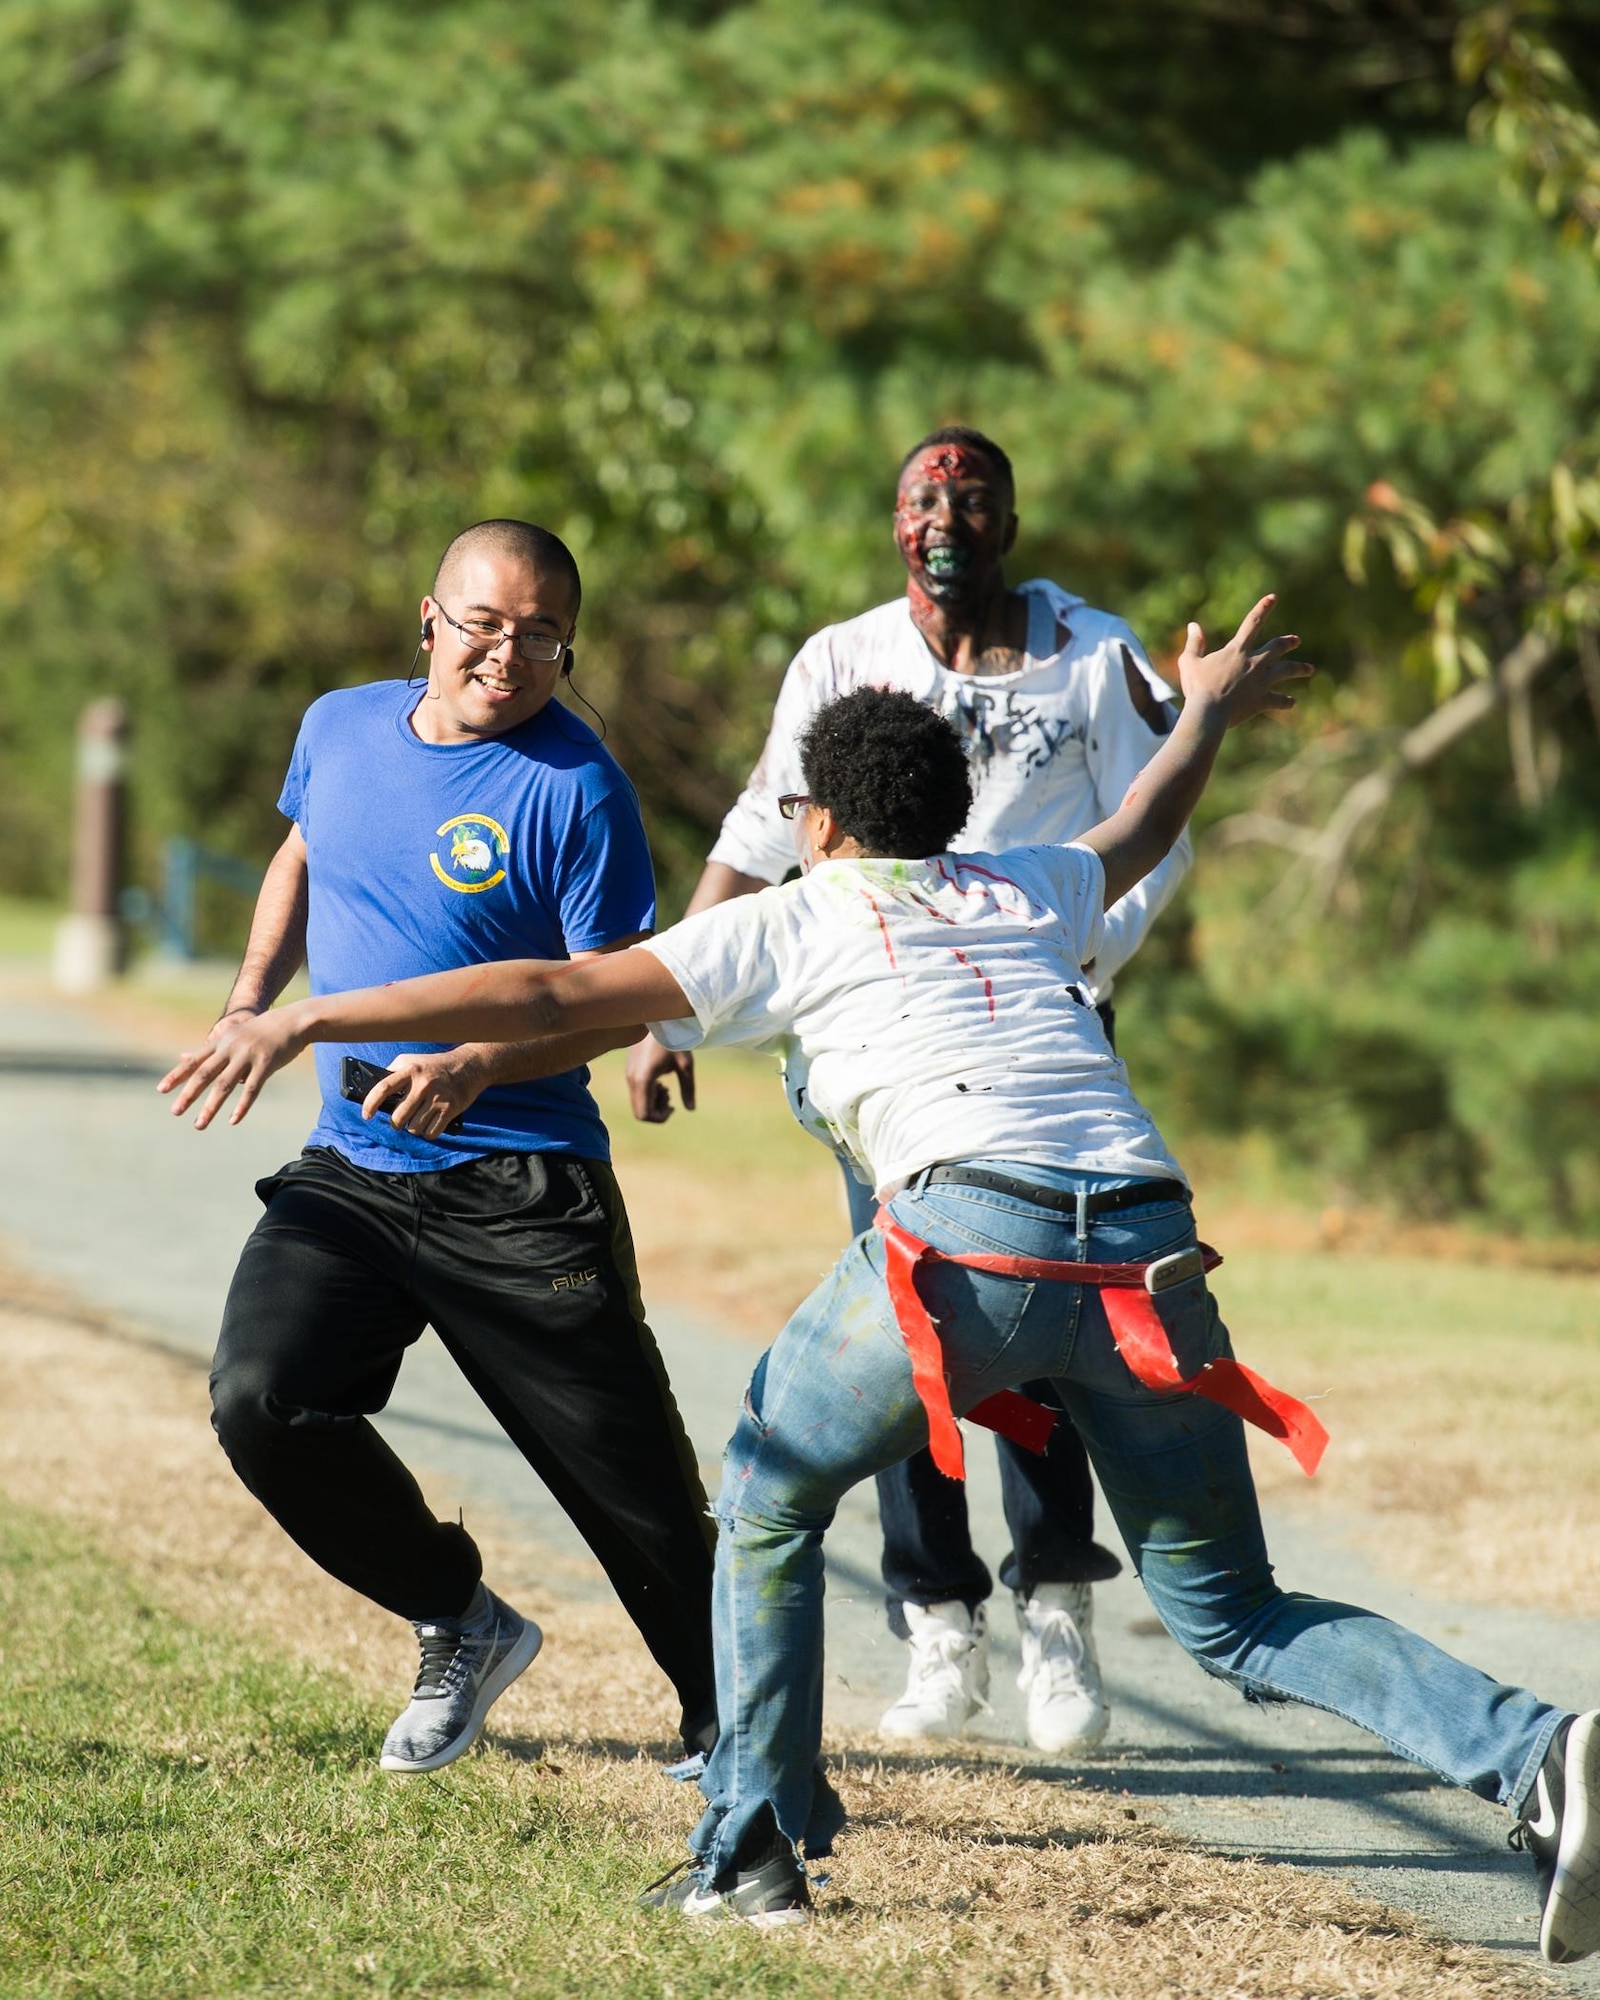 A participant narrowly escapes capture during the 2017 Zombie Fun Run Oct. 27, 2017, at Dover Air Force Base, Del. Over 200 runners participated in the event. (U.S. Air Force photo by Mauricio Campino)